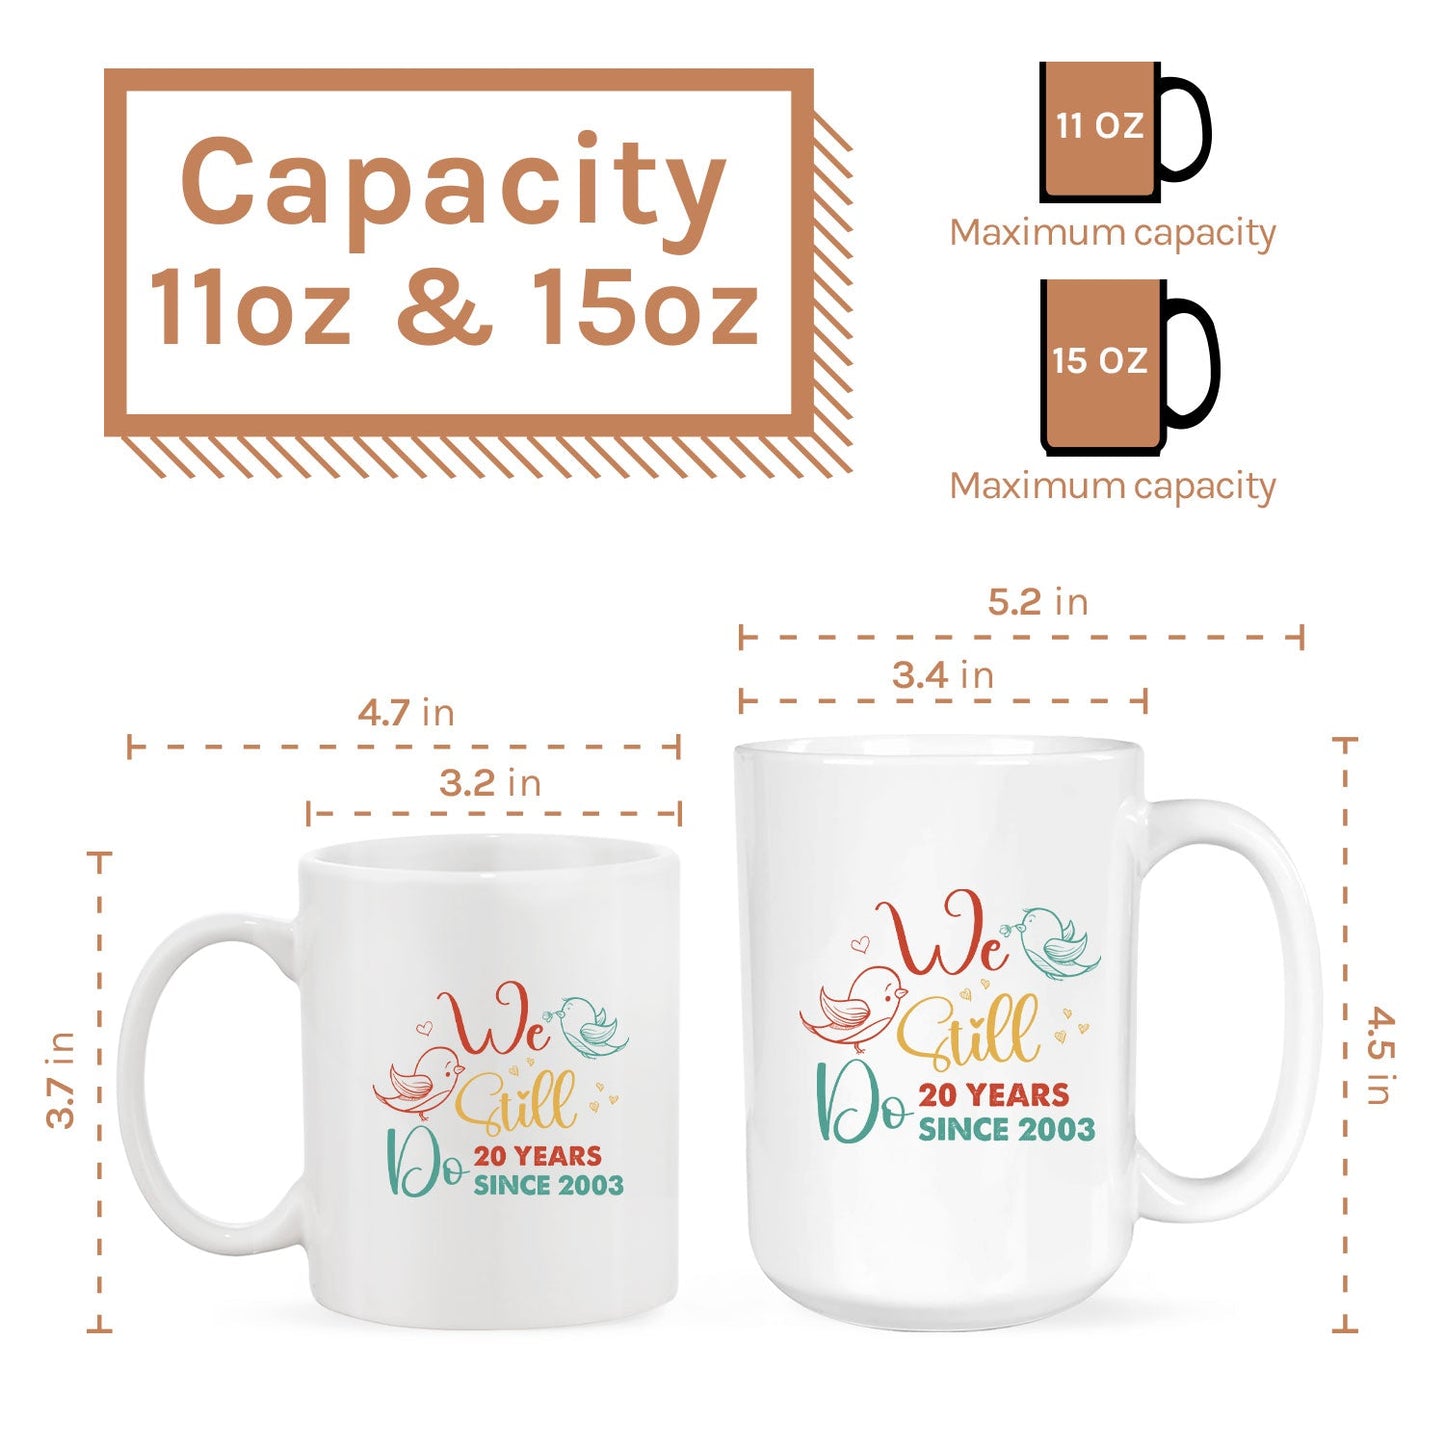 We Still Do - Personalized 15 Year Anniversary gift for Husband or Wife - Custom Mug - MyMindfulGifts